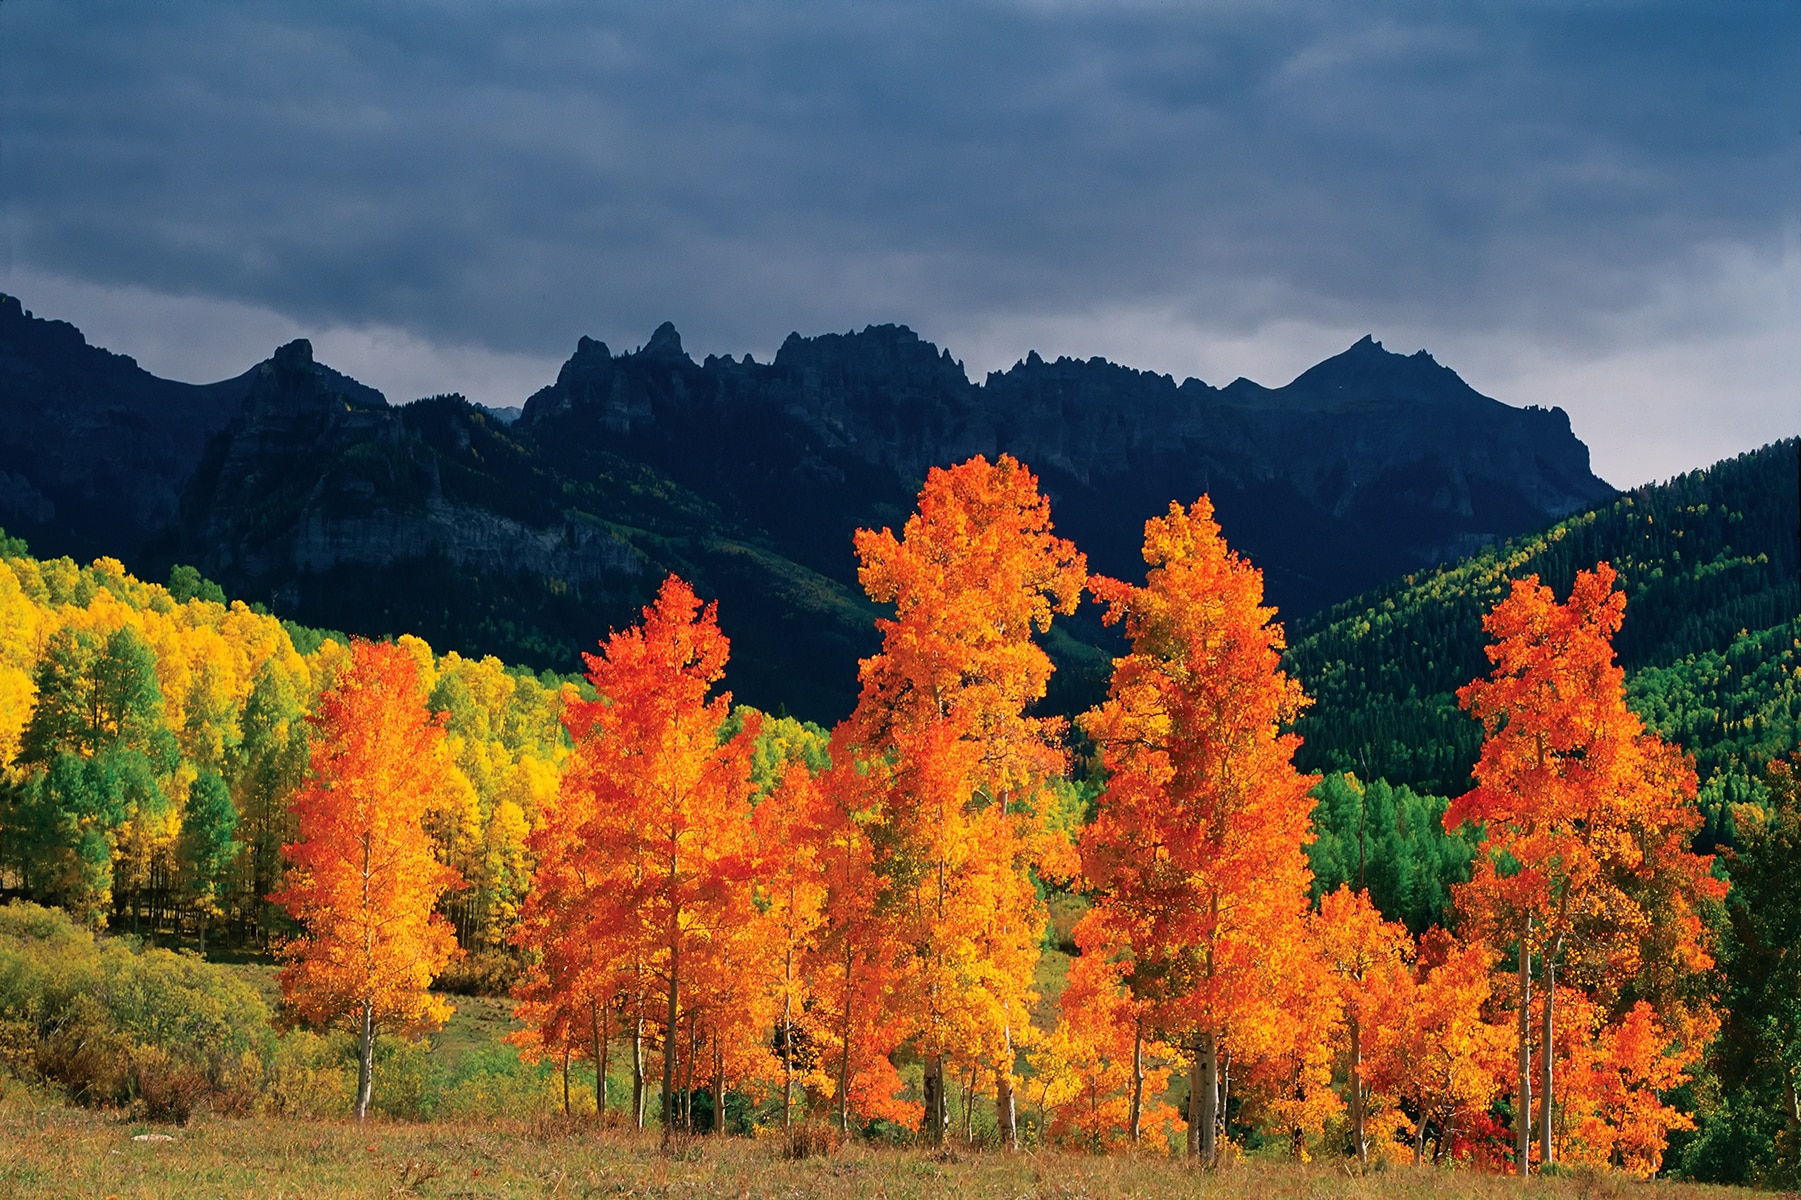 In storm light against the brooding backdrop of the Uncompahgre Mountains, one aspen clone blazes orange while the leaves of another clome remain brillant yellow green, Owl Creek Pass Road.